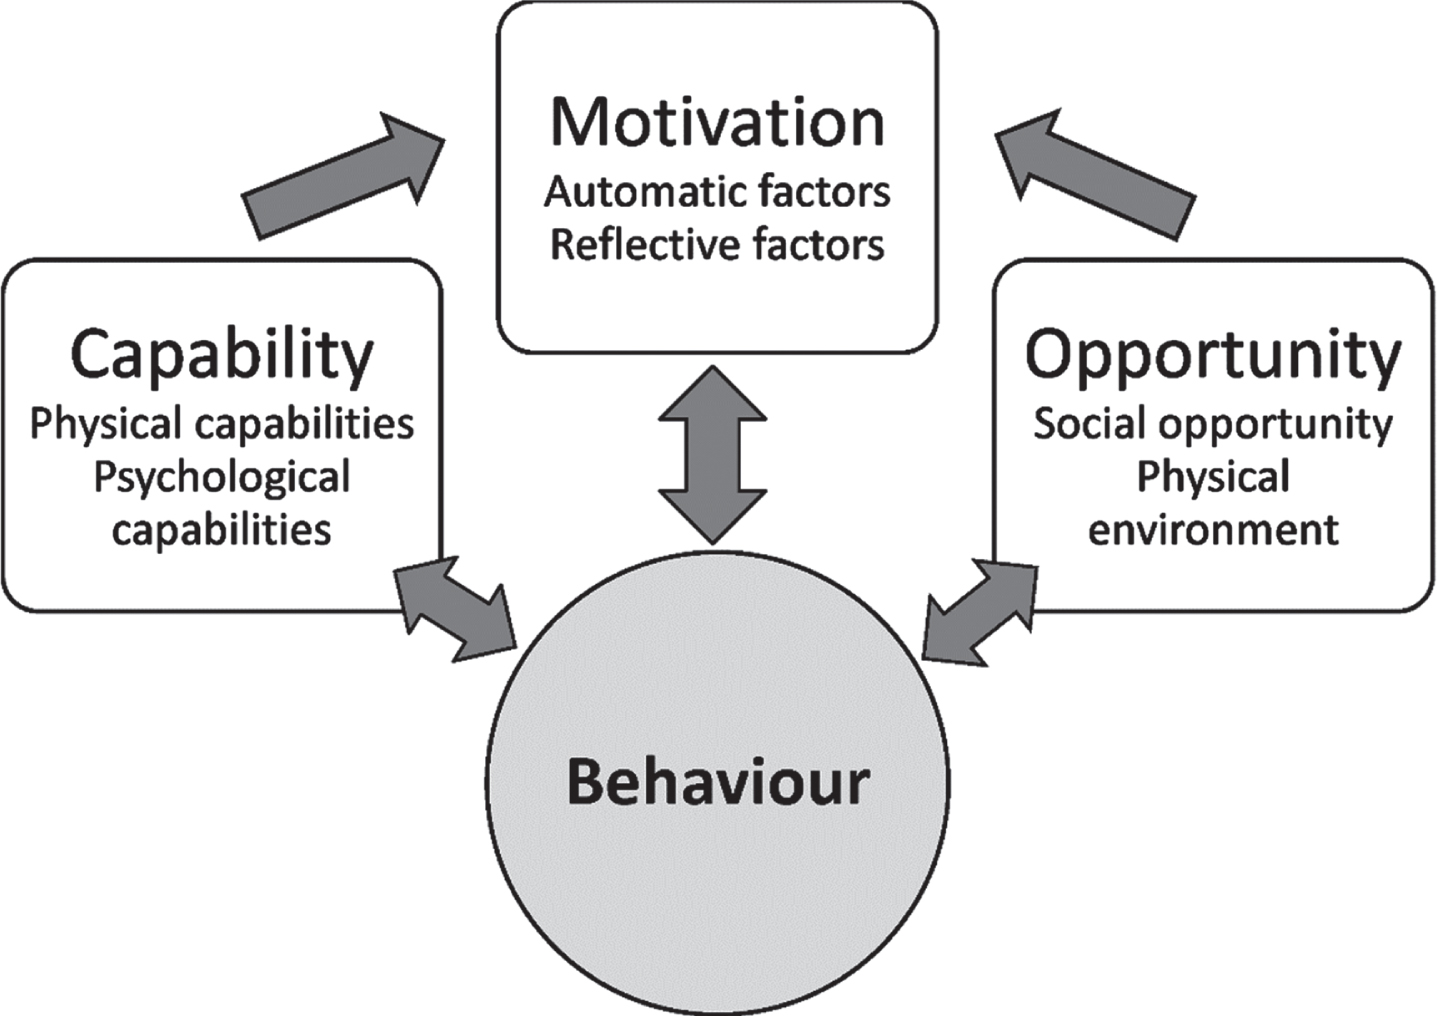 The COM-B system of constructs underpinning behavior change, adapted from [41]. Each major model construct includes multiple individual mechanisms. Capability includes physical and psychological capabilities (including knowledge); Motivation includes automatic and reflective factors (e.g., habits and outcome expectancies); Opportunity includes both social and physical environmental factors. The system proposes that capabilities and opportunities both influence motivation and that each construct directly influences behavior. Finally, behaviors themselves reciprocally influence capabilities, motivation, and opportunities.